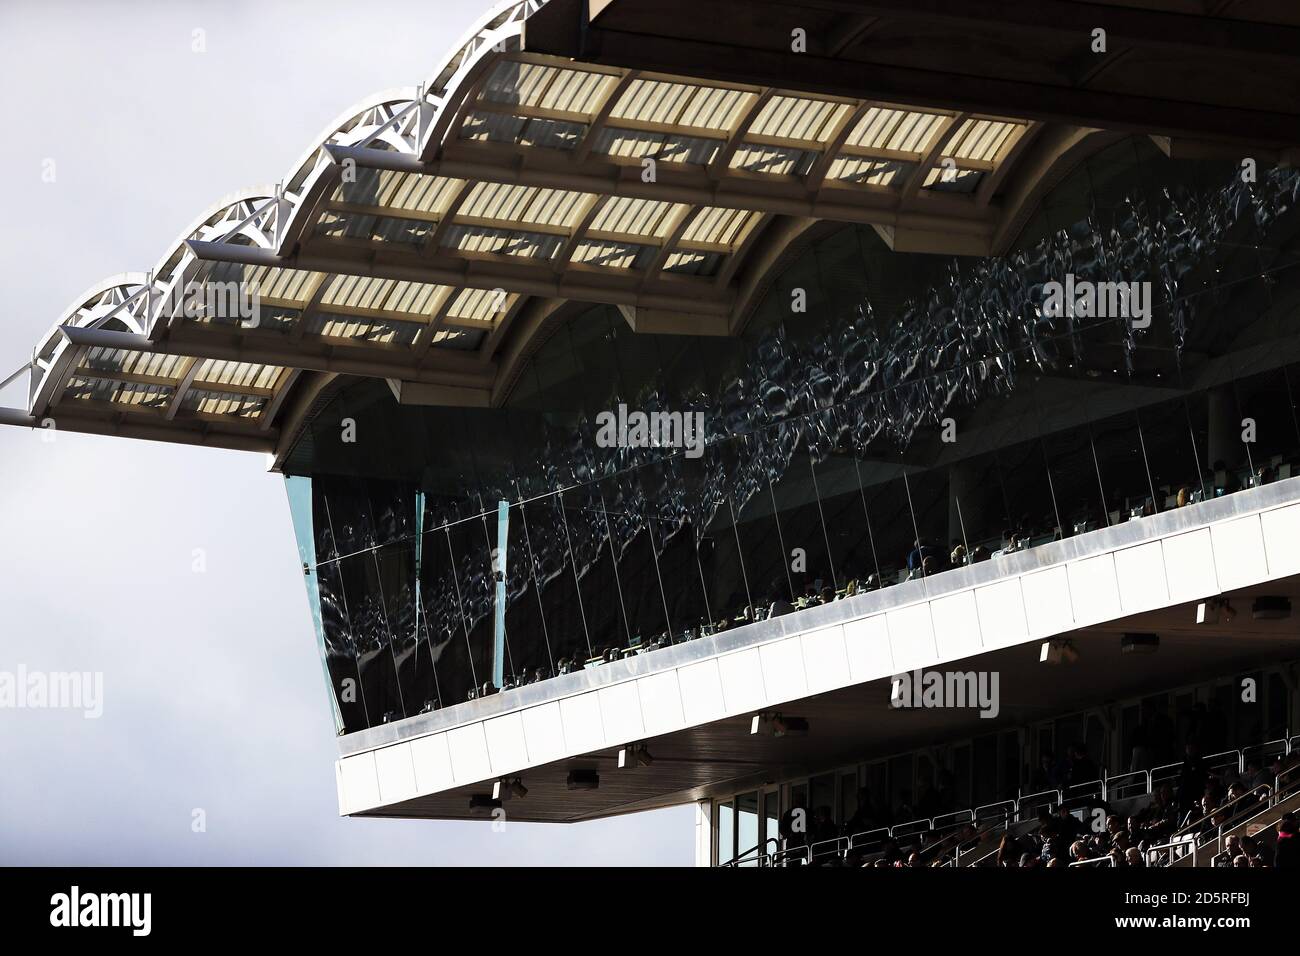 A general view of the Grandstand at Cheltenham Racecourse during Festival Trials Day Stock Photo